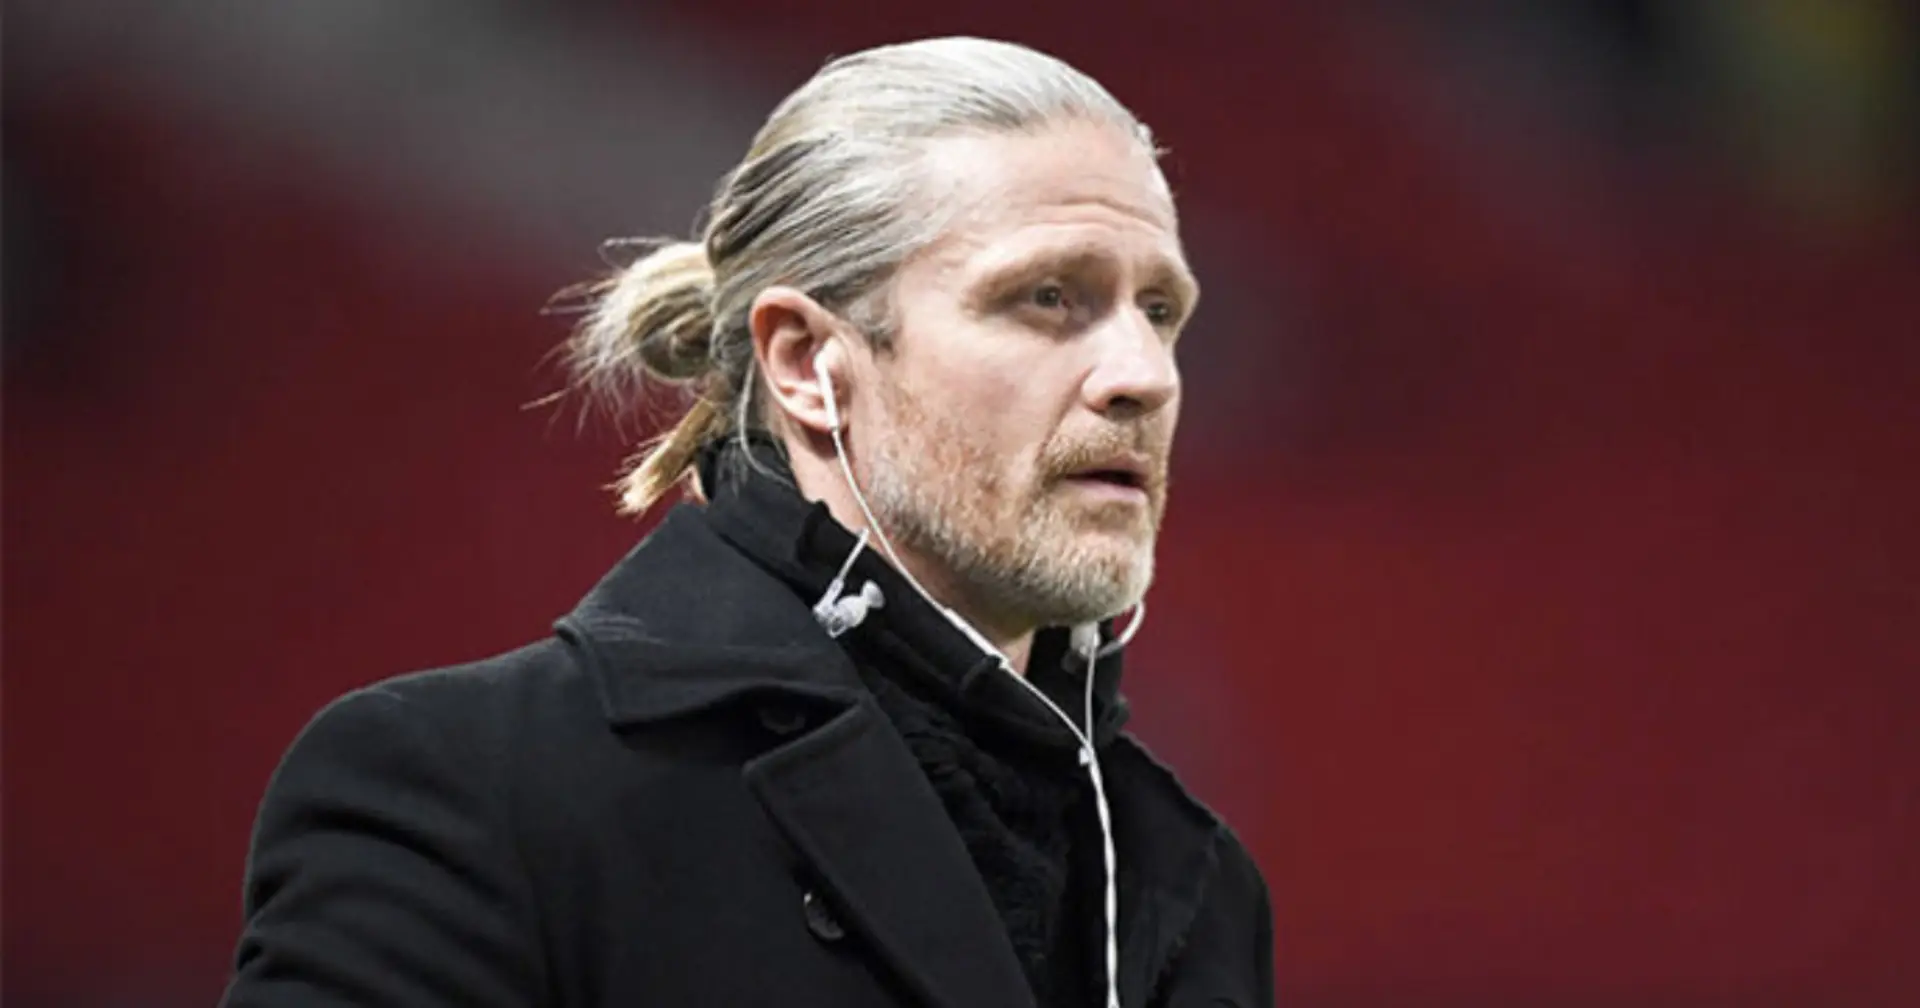 Emmanuel Petit names 2 Arsenal stars who can win Player of the Year — Odegaard not among them